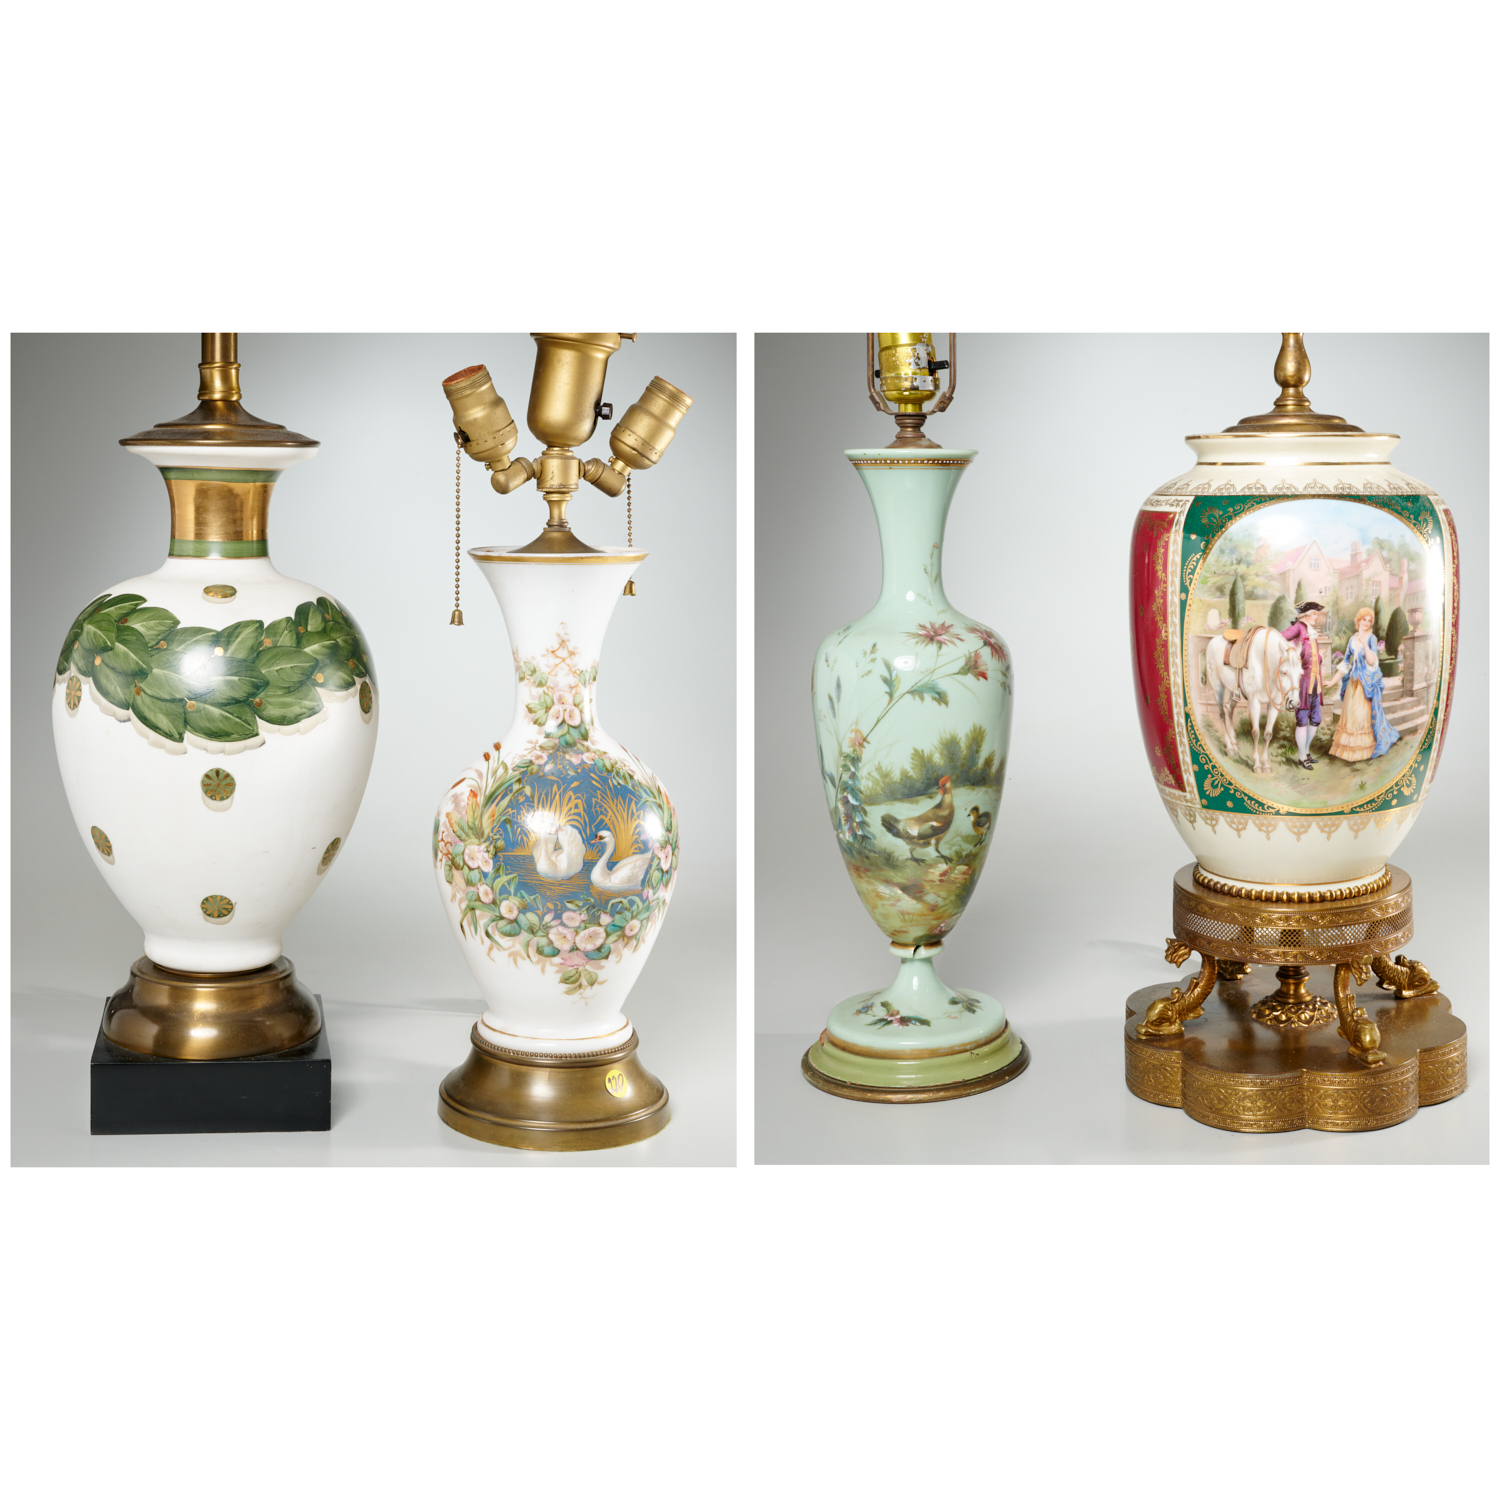 (4) DECORATED GLASS AND PORCELAIN